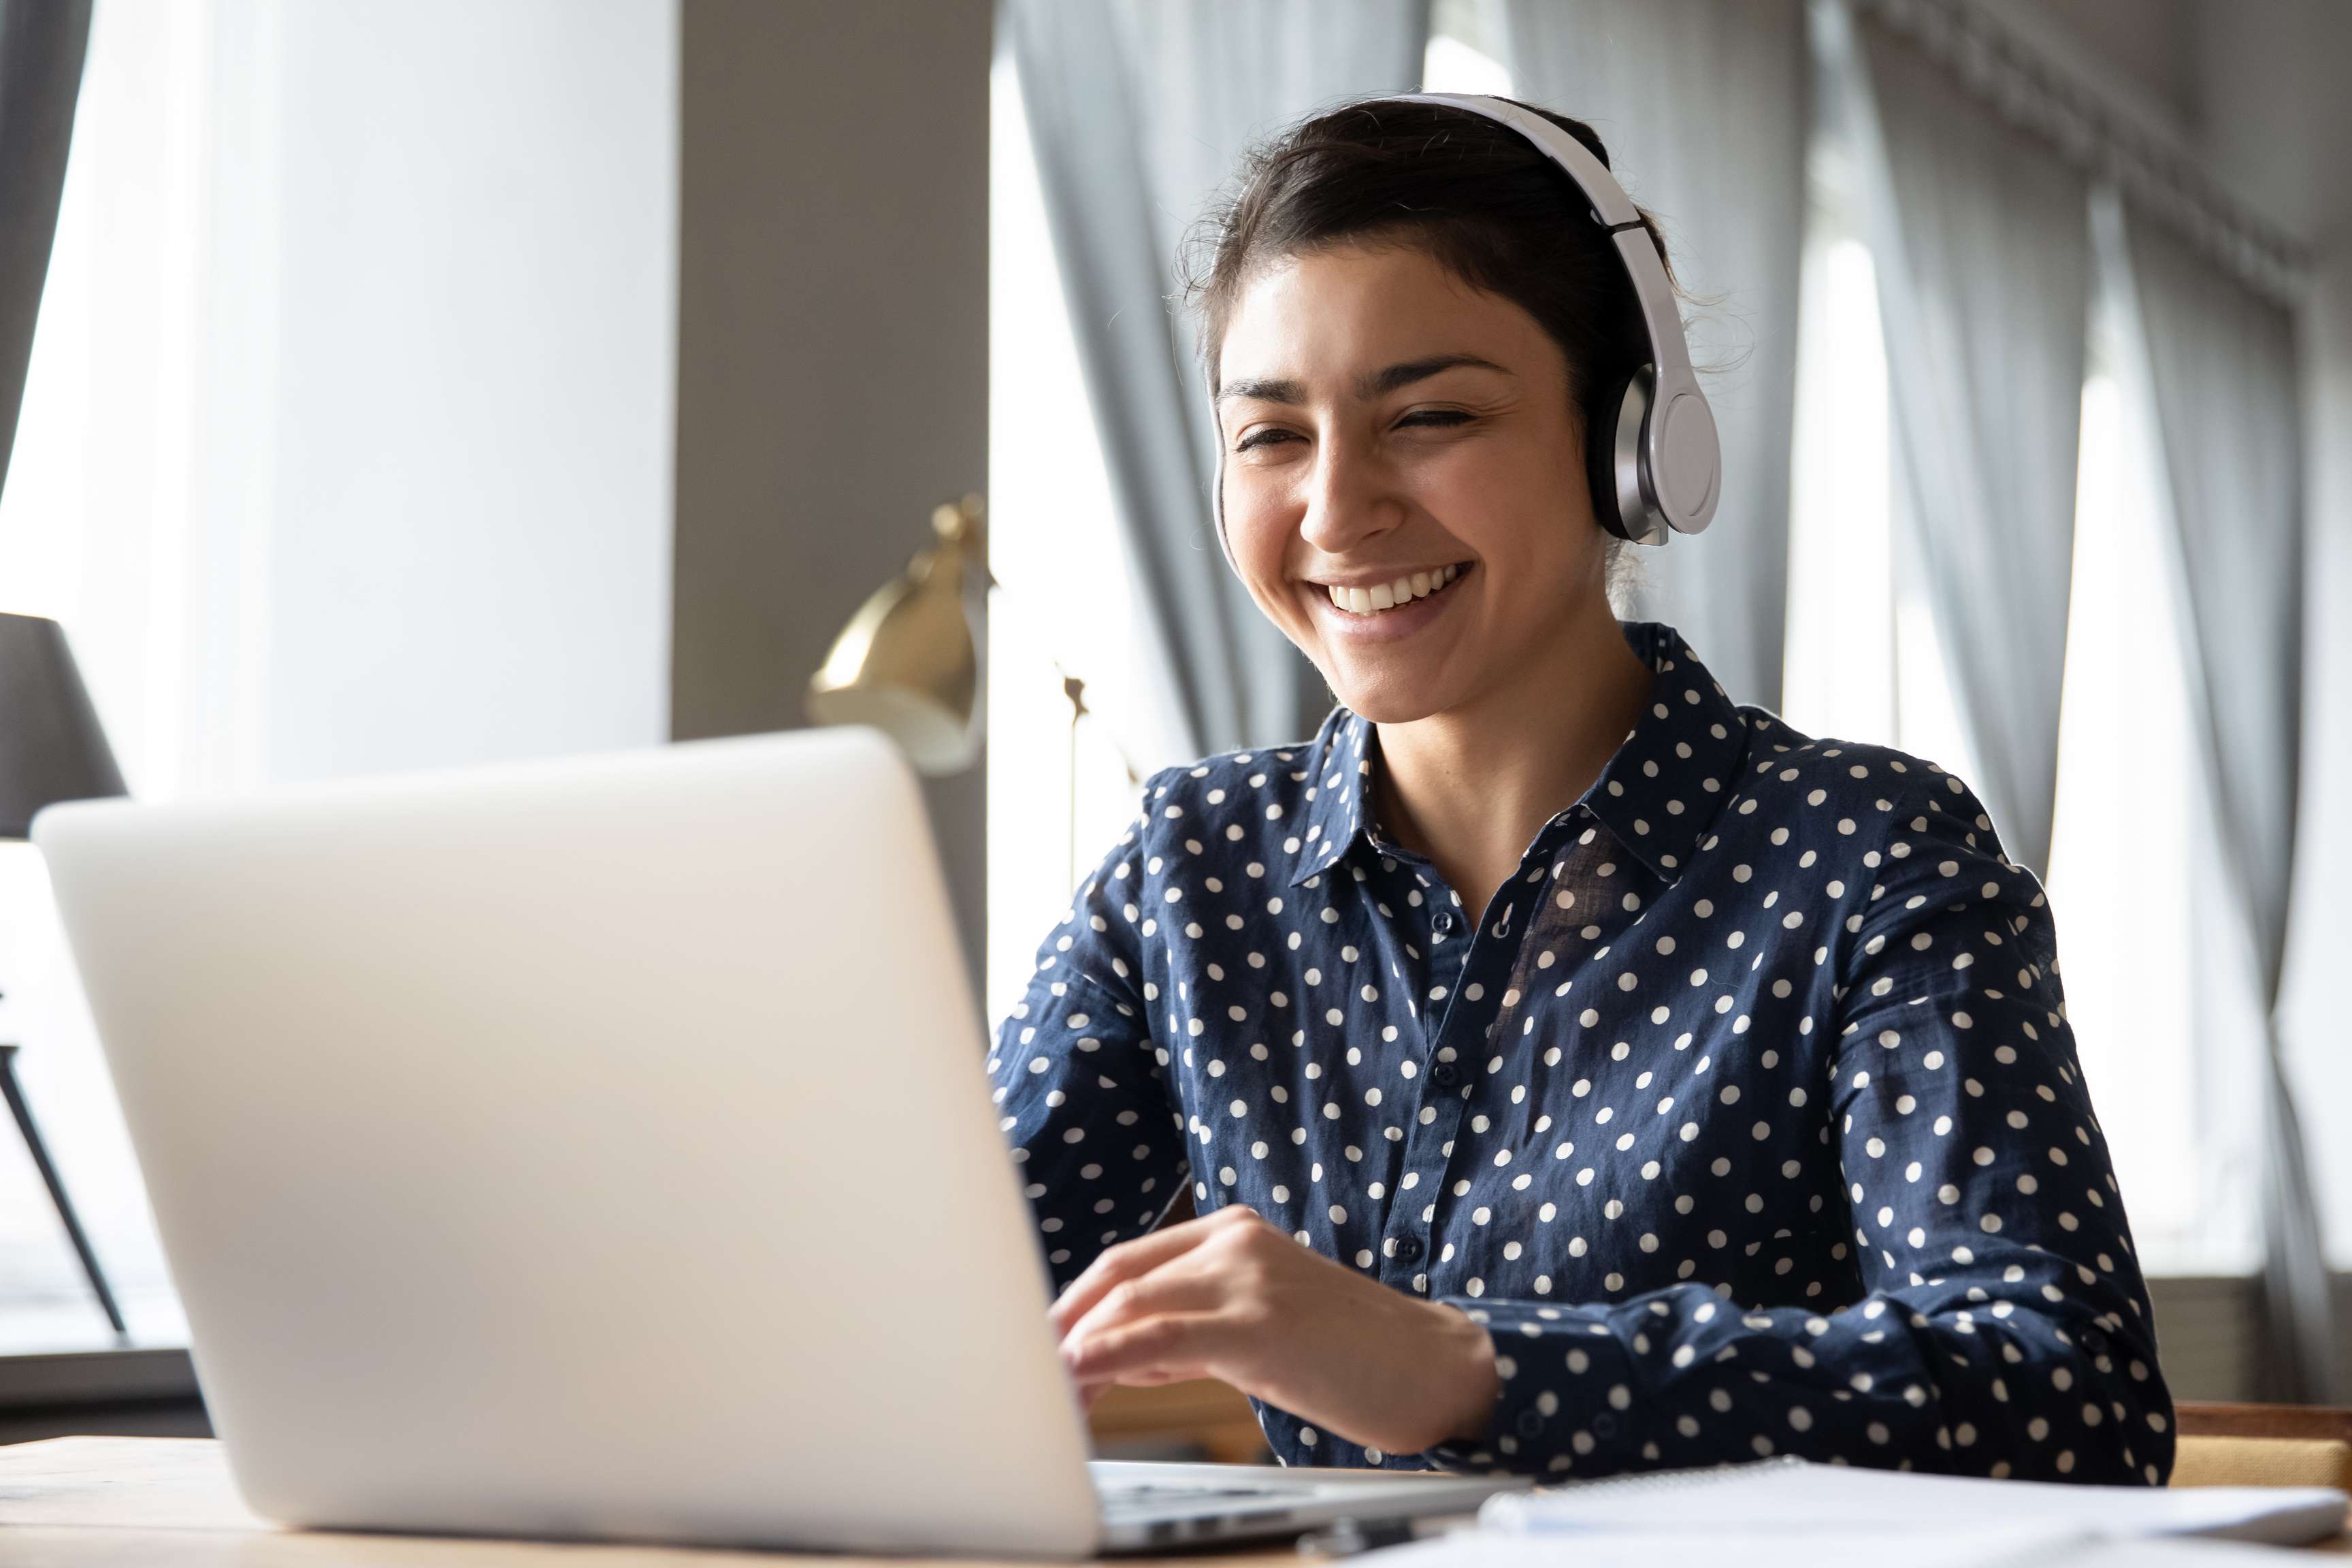 Woman smiling with headset on sitting in front of laptop.